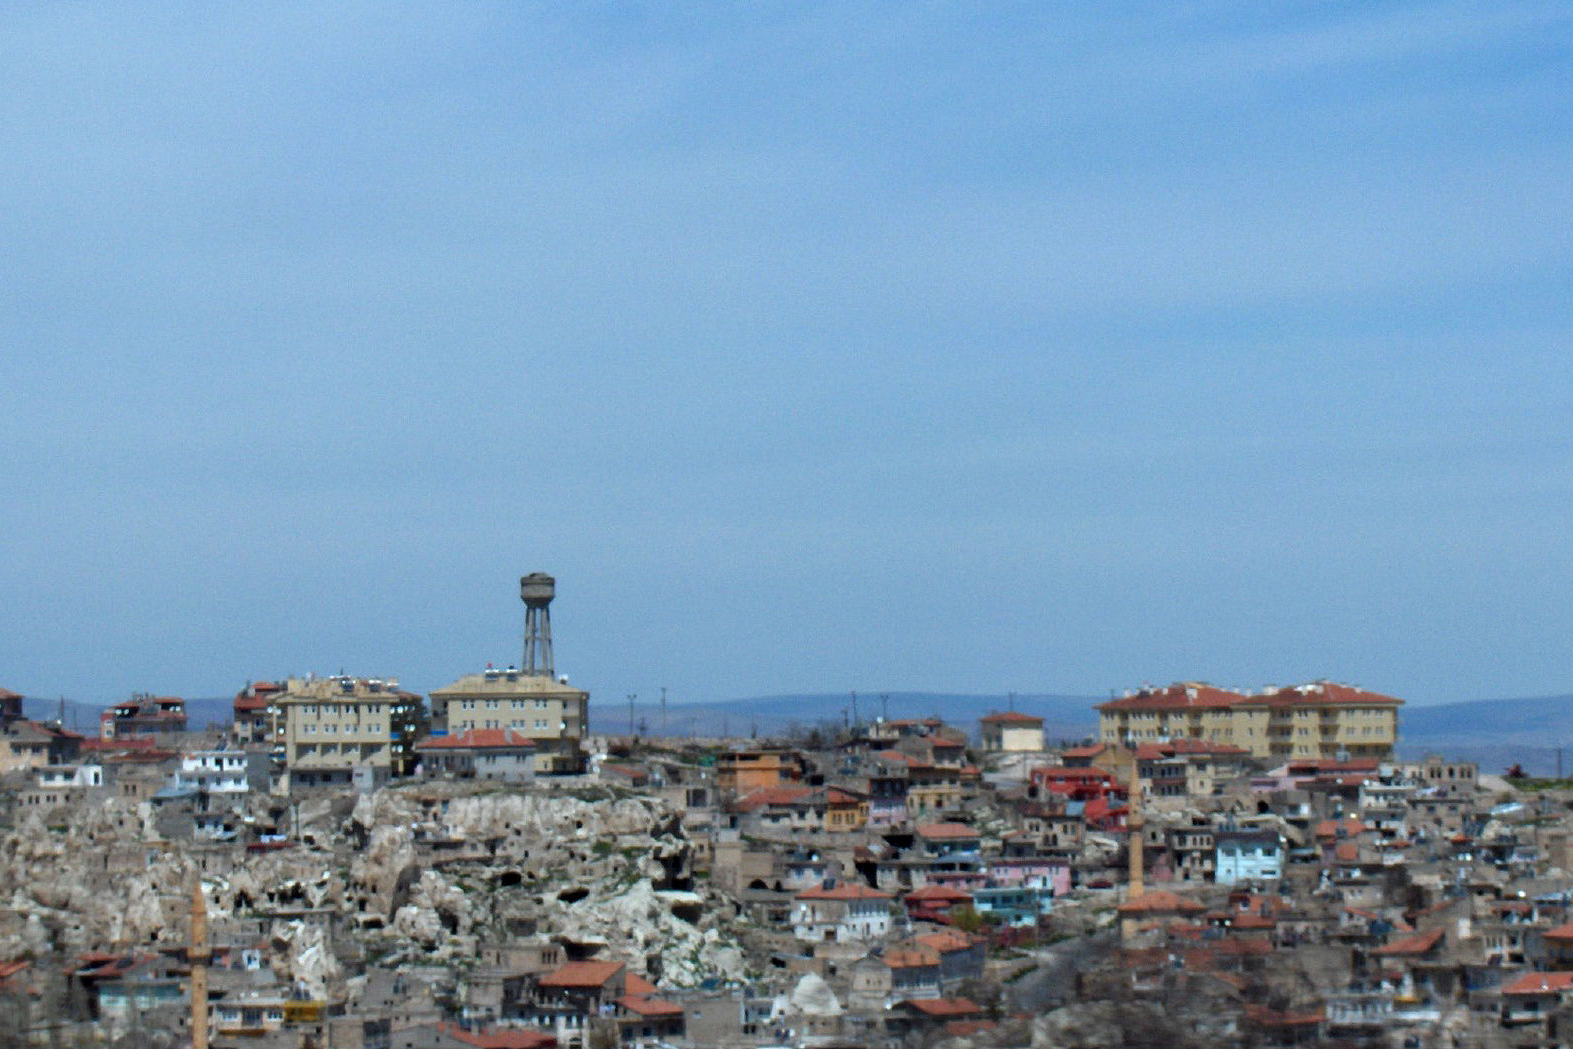 The town of Nevşehir, on whose outskirts the new underground city was discovered